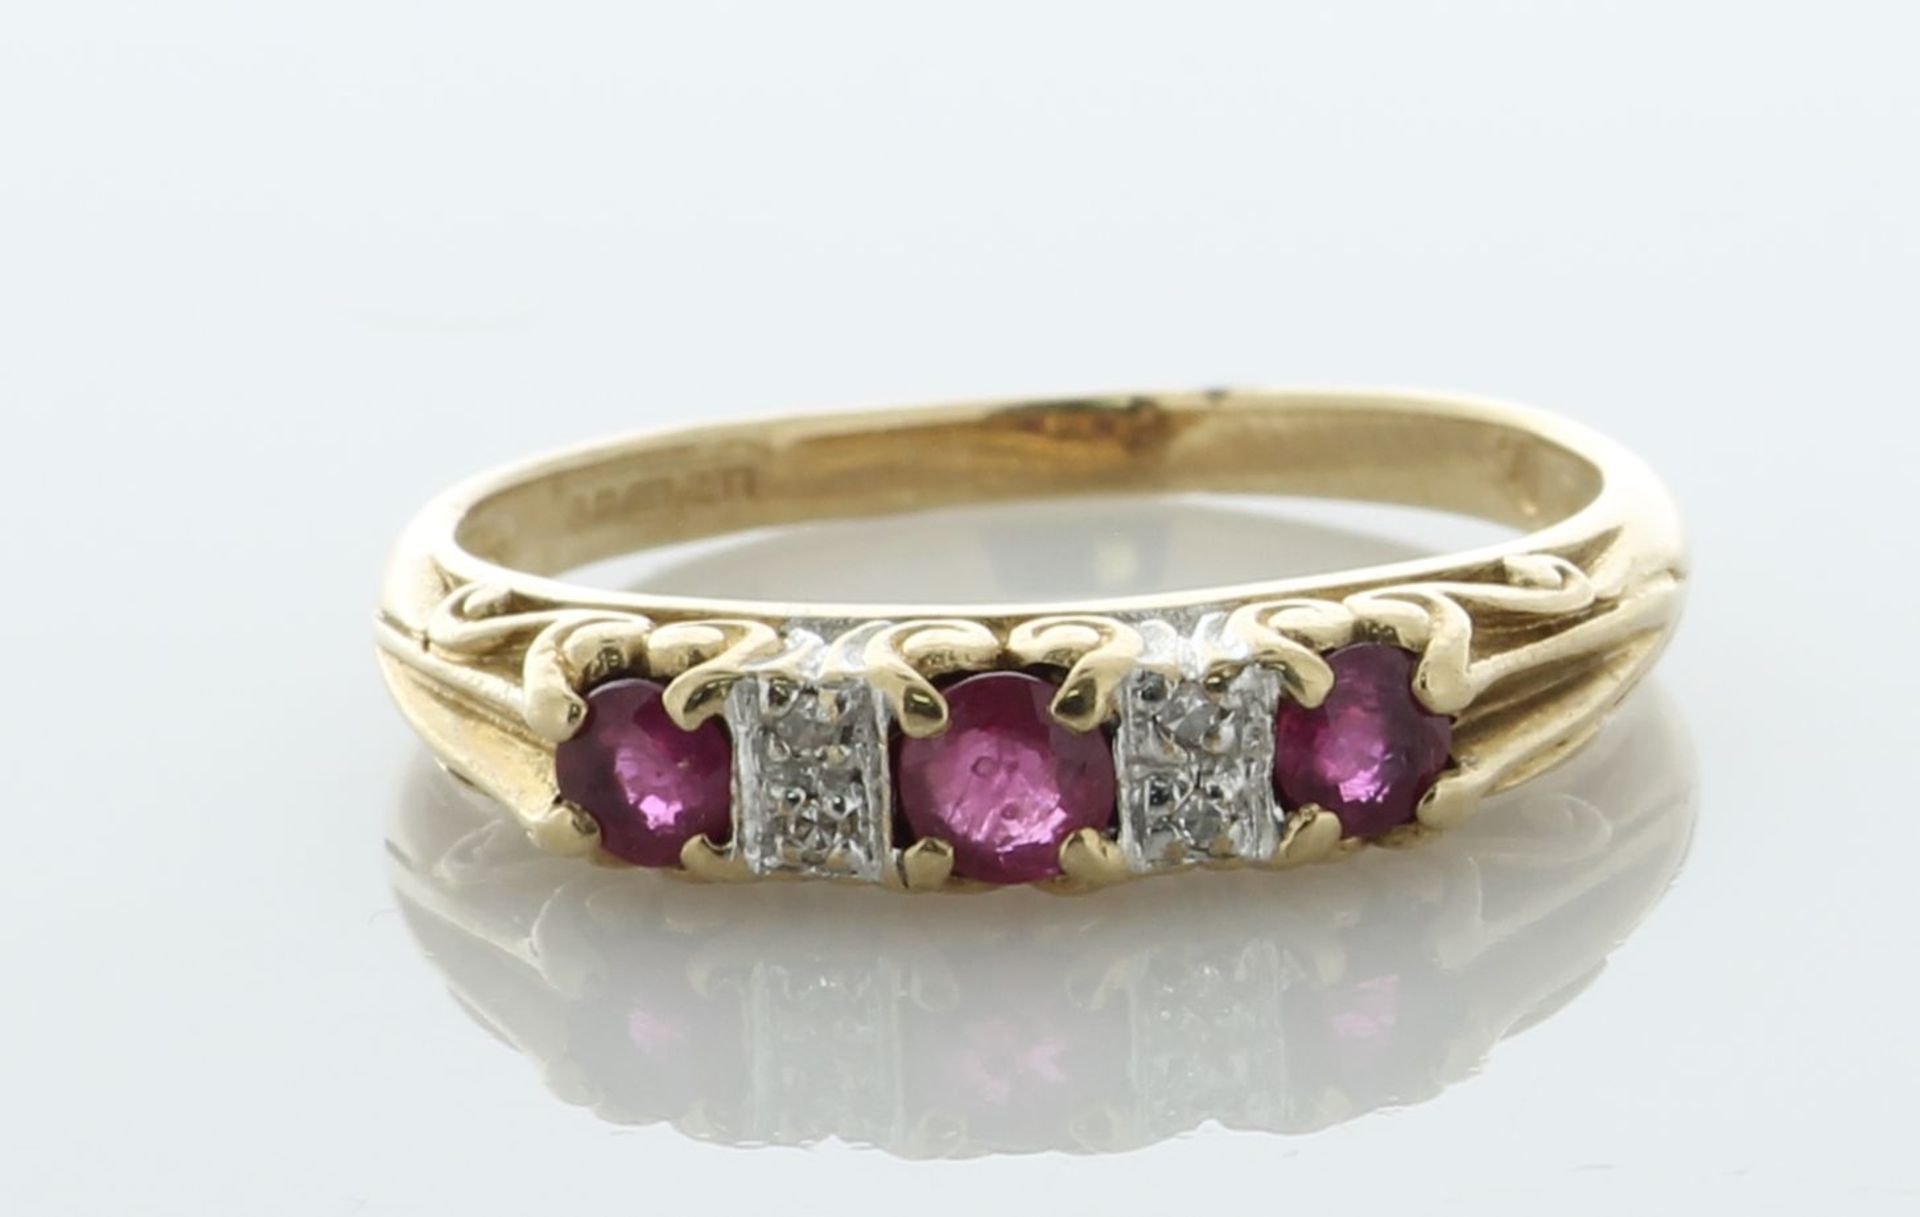 9ct Yellow Gold And White Gold Diamond And Ruby Ring (R 0.30) 0.05 Carats - Valued By AGI £815.